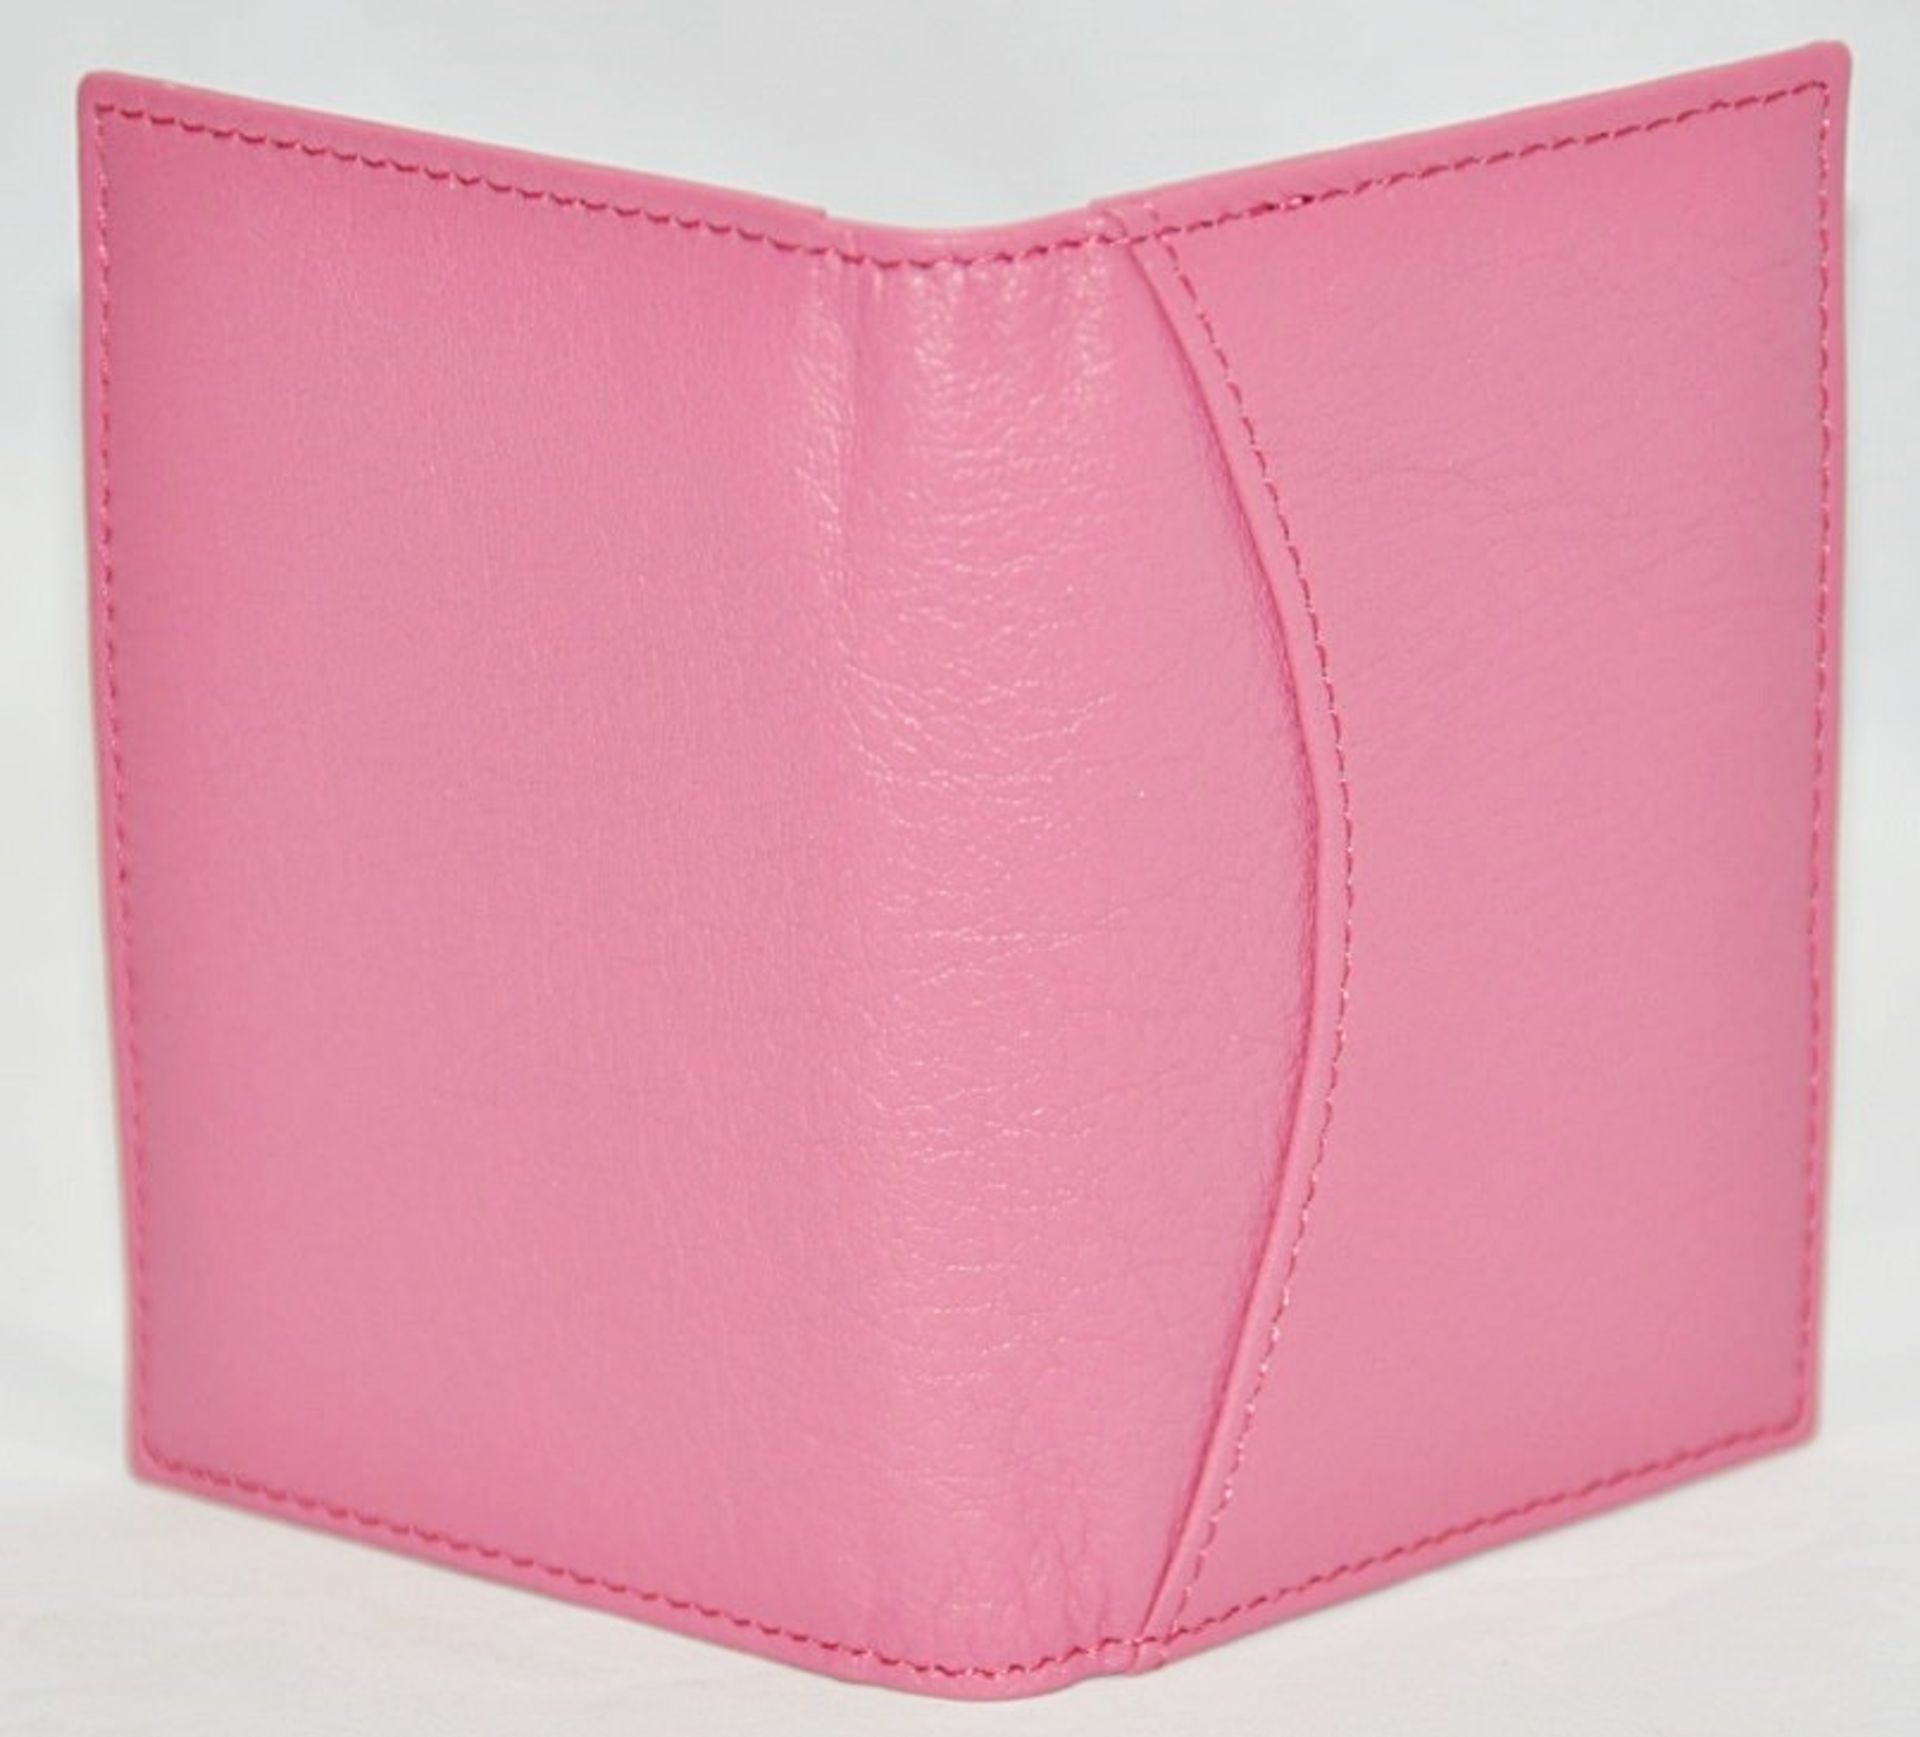 72 x Genuine Fine Leather Travel Card / Credit Card Holders by ICE London - EGW-6007-PK - Colour: - Image 4 of 6